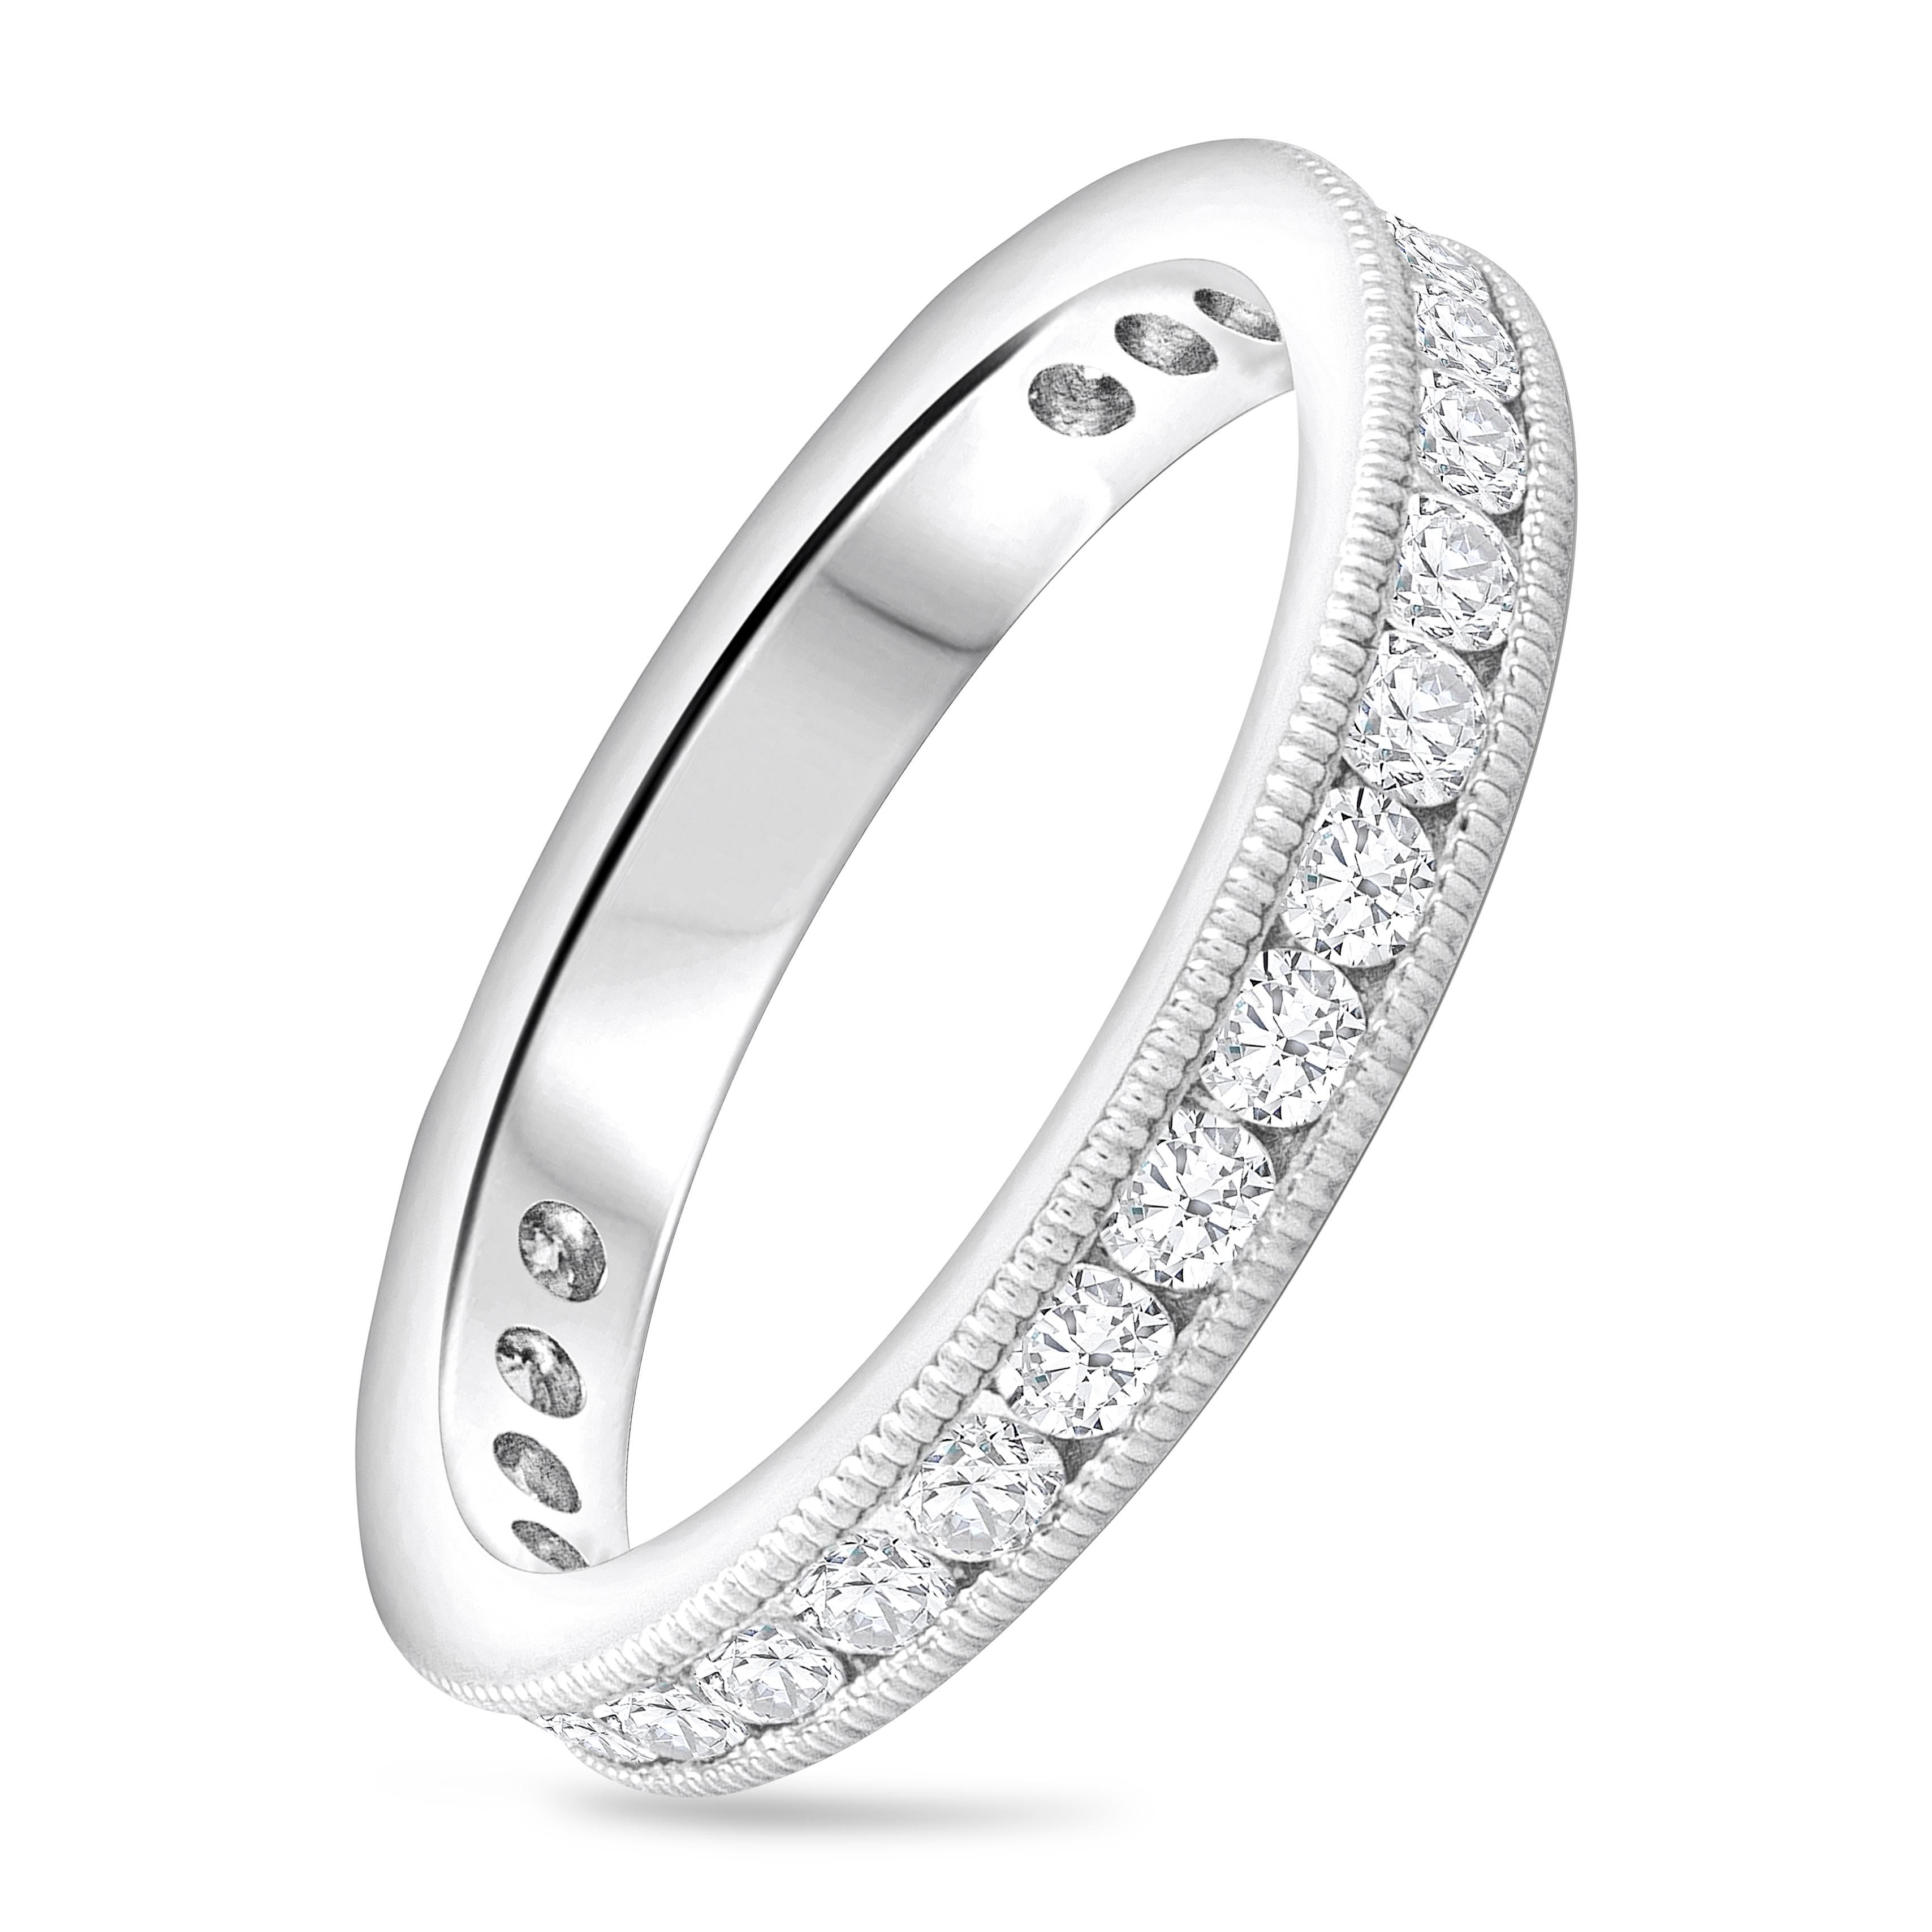 An expertly-crafted wedding band showcasing brilliant round diamonds weighing 0.81 carats total, set in a channel set and finished with intricate milgrain edges. Made with Platinum. Size 6.5 US resizable upon request.

Roman Malakov is a custom